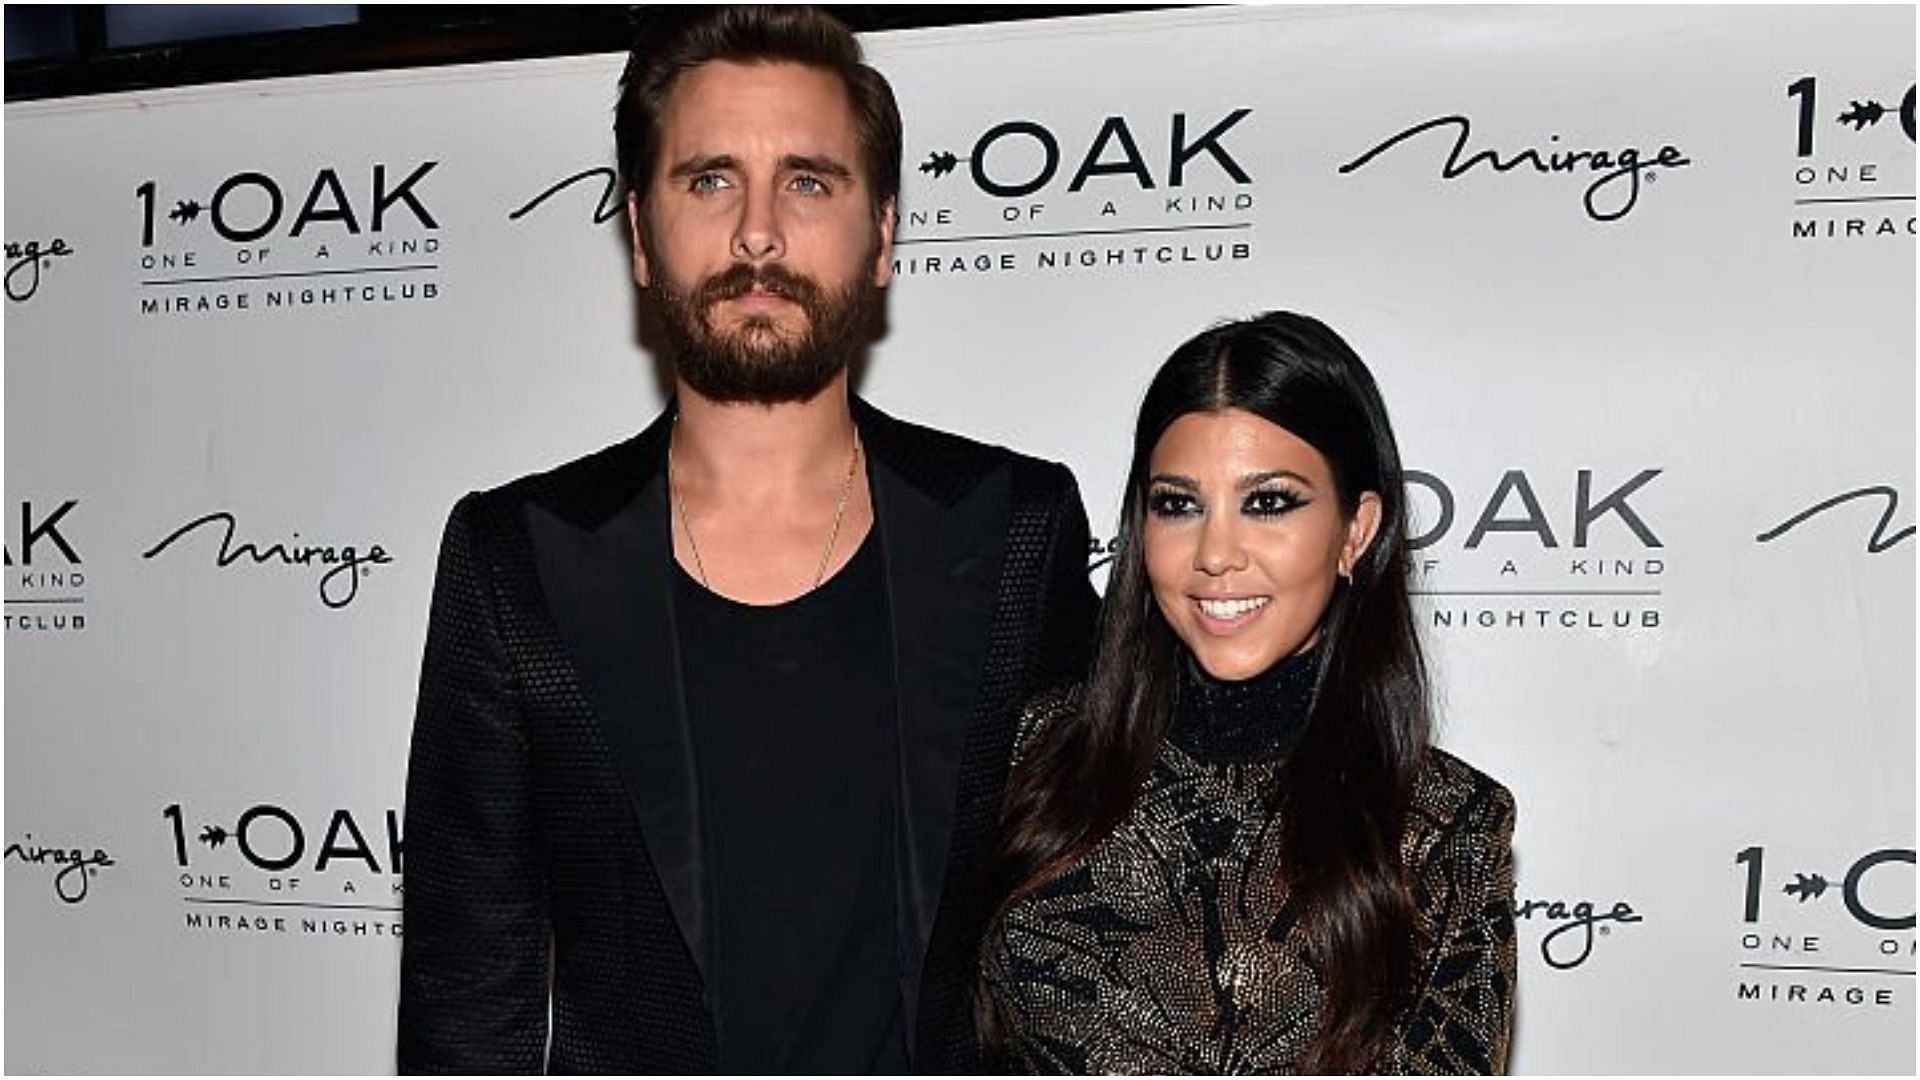 Scott Disick and Kourtney Kardashian dated from 2005 to 2015 (David Becker/Getty Images)